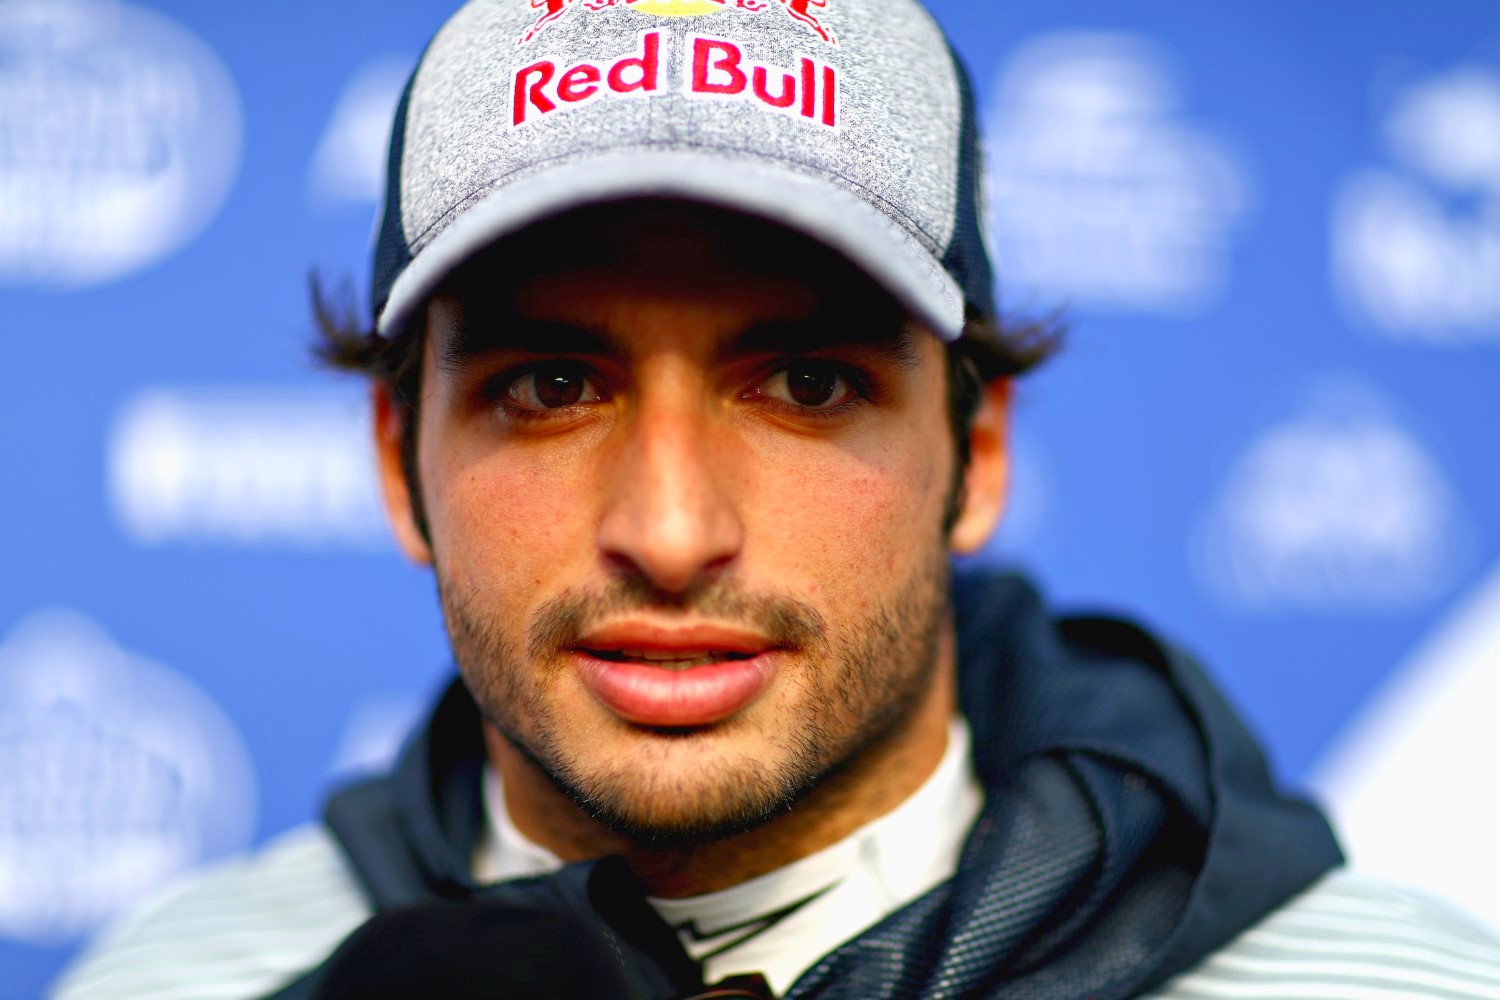 After being read the riot act, Sainz Jr. changes his tune